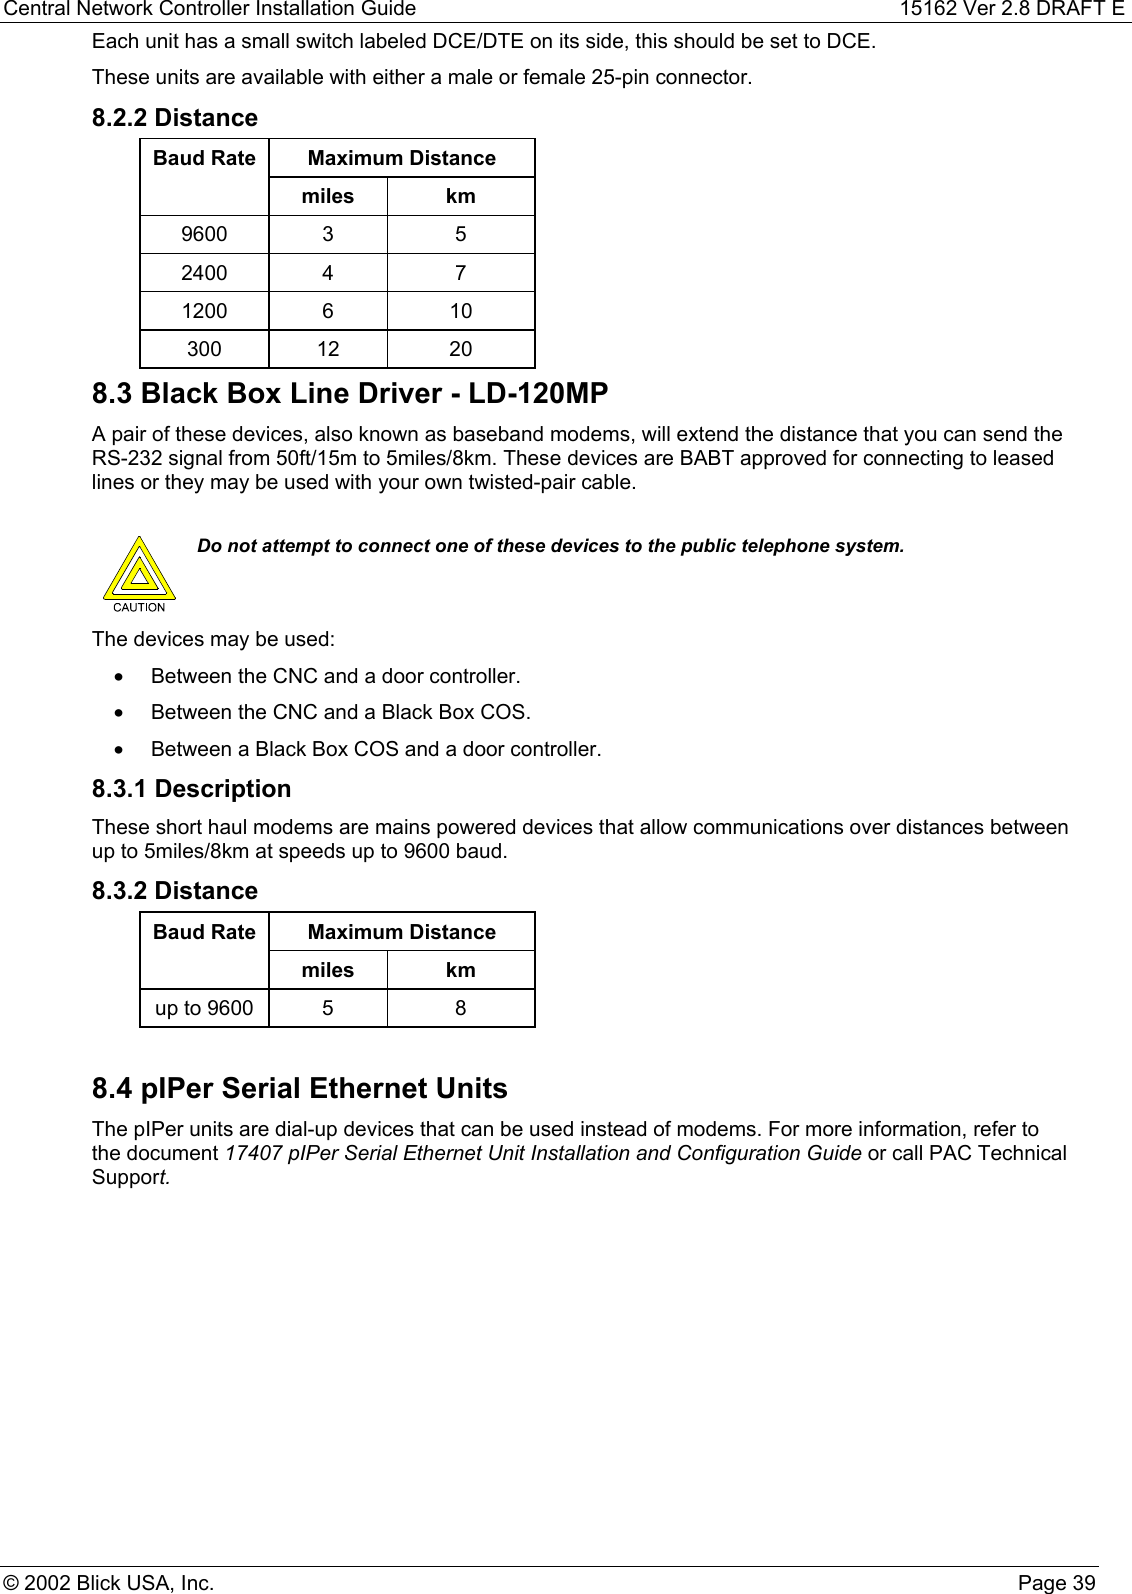 Central Network Controller Installation Guide 15162 Ver 2.8 DRAFT E© 2002 Blick USA, Inc. Page 39Each unit has a small switch labeled DCE/DTE on its side, this should be set to DCE.These units are available with either a male or female 25-pin connector.8.2.2 DistanceMaximum DistanceBaud Ratemiles km9600 3 52400 4 71200 6 10300 12 208.3 Black Box Line Driver - LD-120MPA pair of these devices, also known as baseband modems, will extend the distance that you can send theRS-232 signal from 50ft/15m to 5miles/8km. These devices are BABT approved for connecting to leasedlines or they may be used with your own twisted-pair cable. Do not attempt to connect one of these devices to the public telephone system.The devices may be used:•Between the CNC and a door controller.•Between the CNC and a Black Box COS.•Between a Black Box COS and a door controller.8.3.1 DescriptionThese short haul modems are mains powered devices that allow communications over distances betweenup to 5miles/8km at speeds up to 9600 baud.8.3.2 DistanceMaximum DistanceBaud Ratemiles kmup to 9600 5 88.4 pIPer Serial Ethernet UnitsThe pIPer units are dial-up devices that can be used instead of modems. For more information, refer tothe document 17407 pIPer Serial Ethernet Unit Installation and Configuration Guide or call PAC TechnicalSupport.